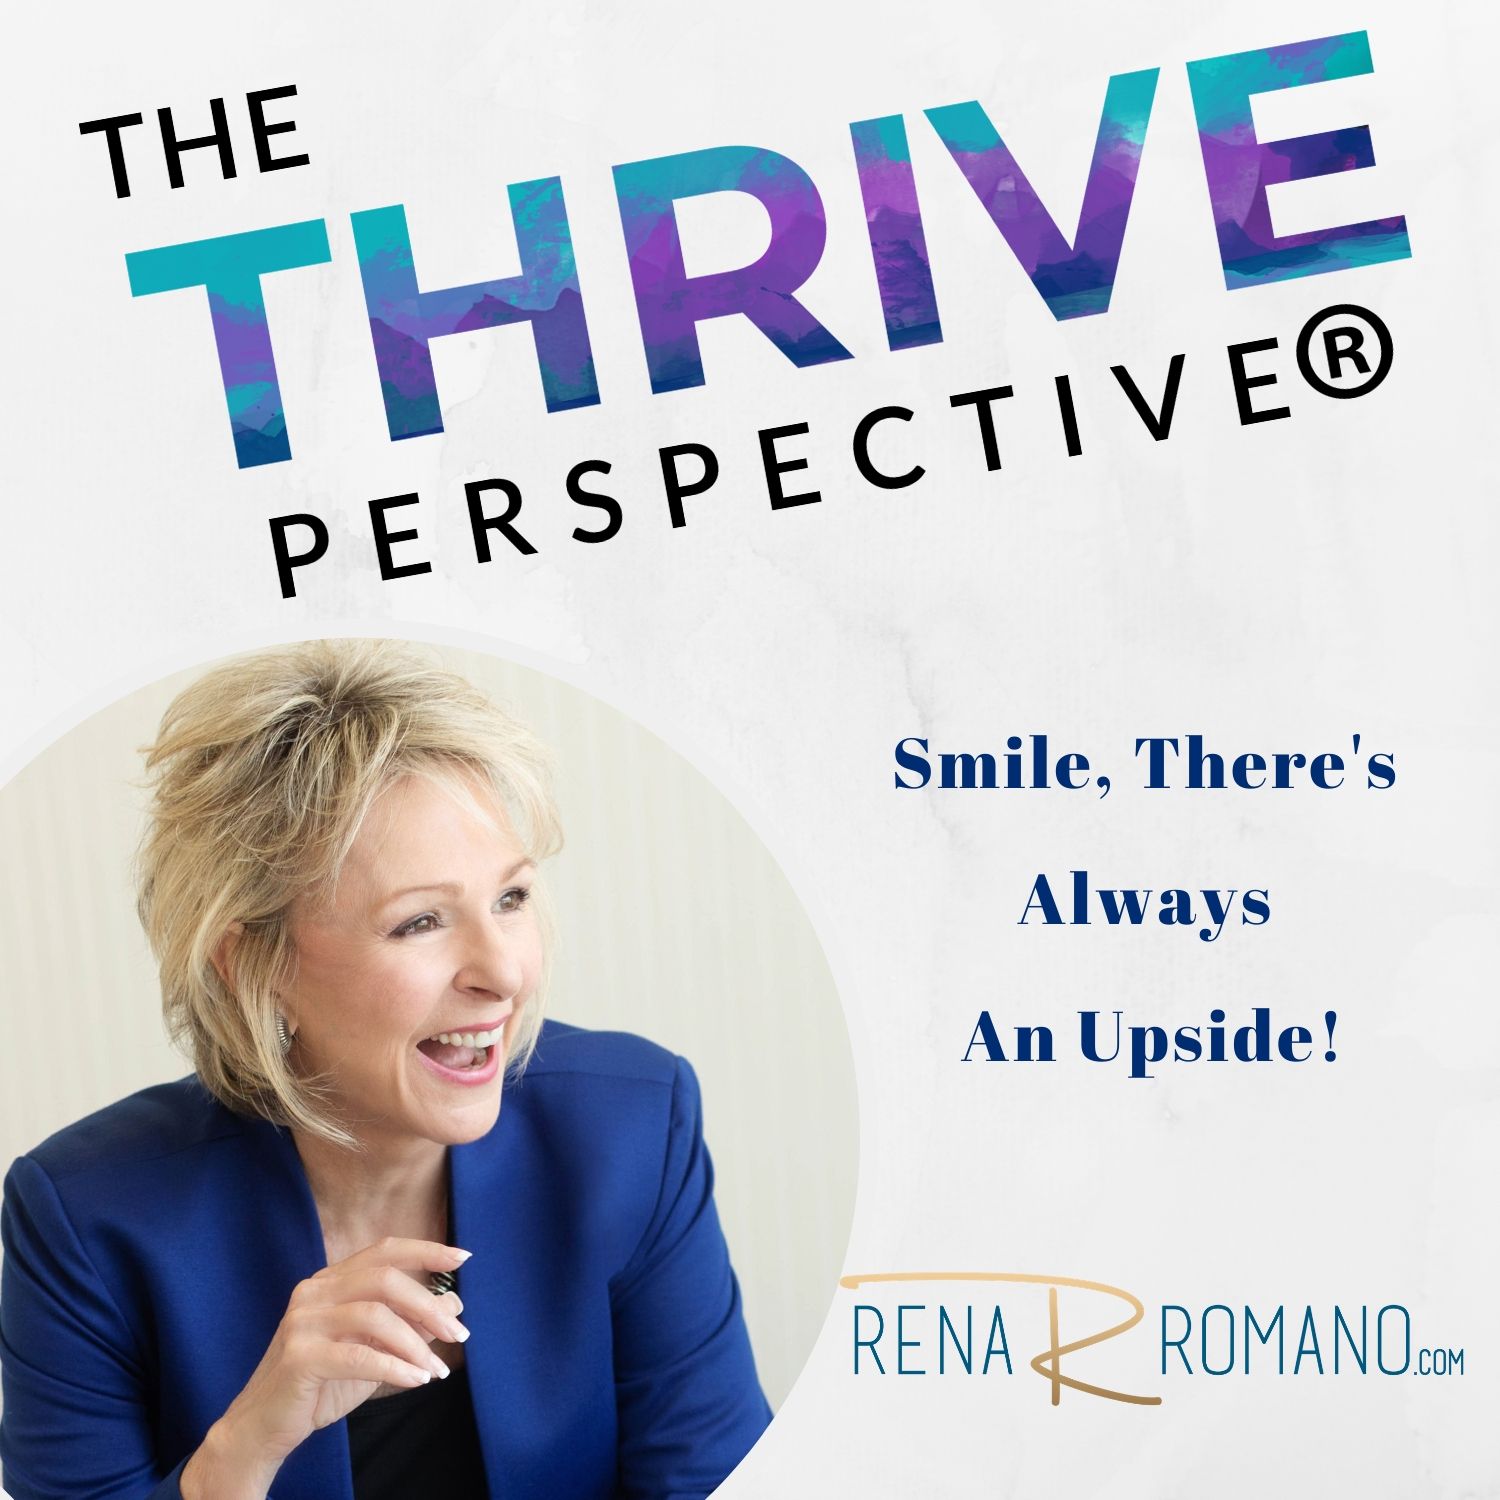 The THRIVE Perspective® -  Inspirational Messages to Live Your Best Life, Because There Is Always An Upside!